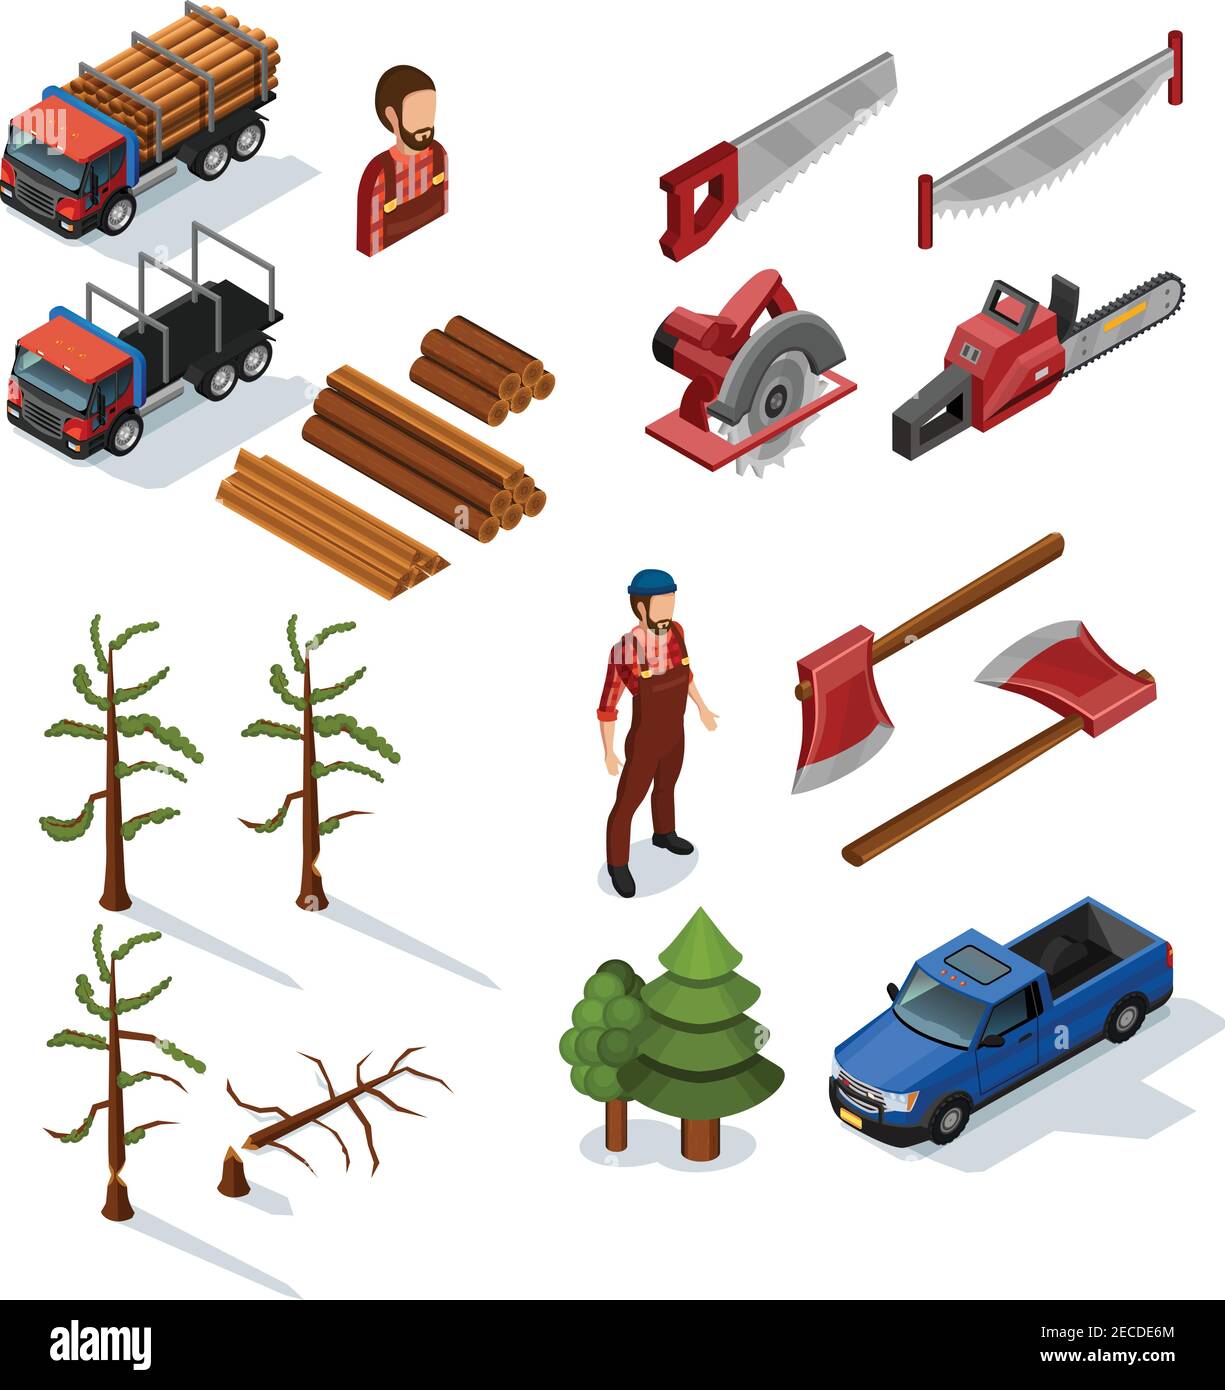 Lumberjack isometric color icons set of woodworking tools lumber trucks woodcutters in uniform  on white background flat isolated vector illustration Stock Vector